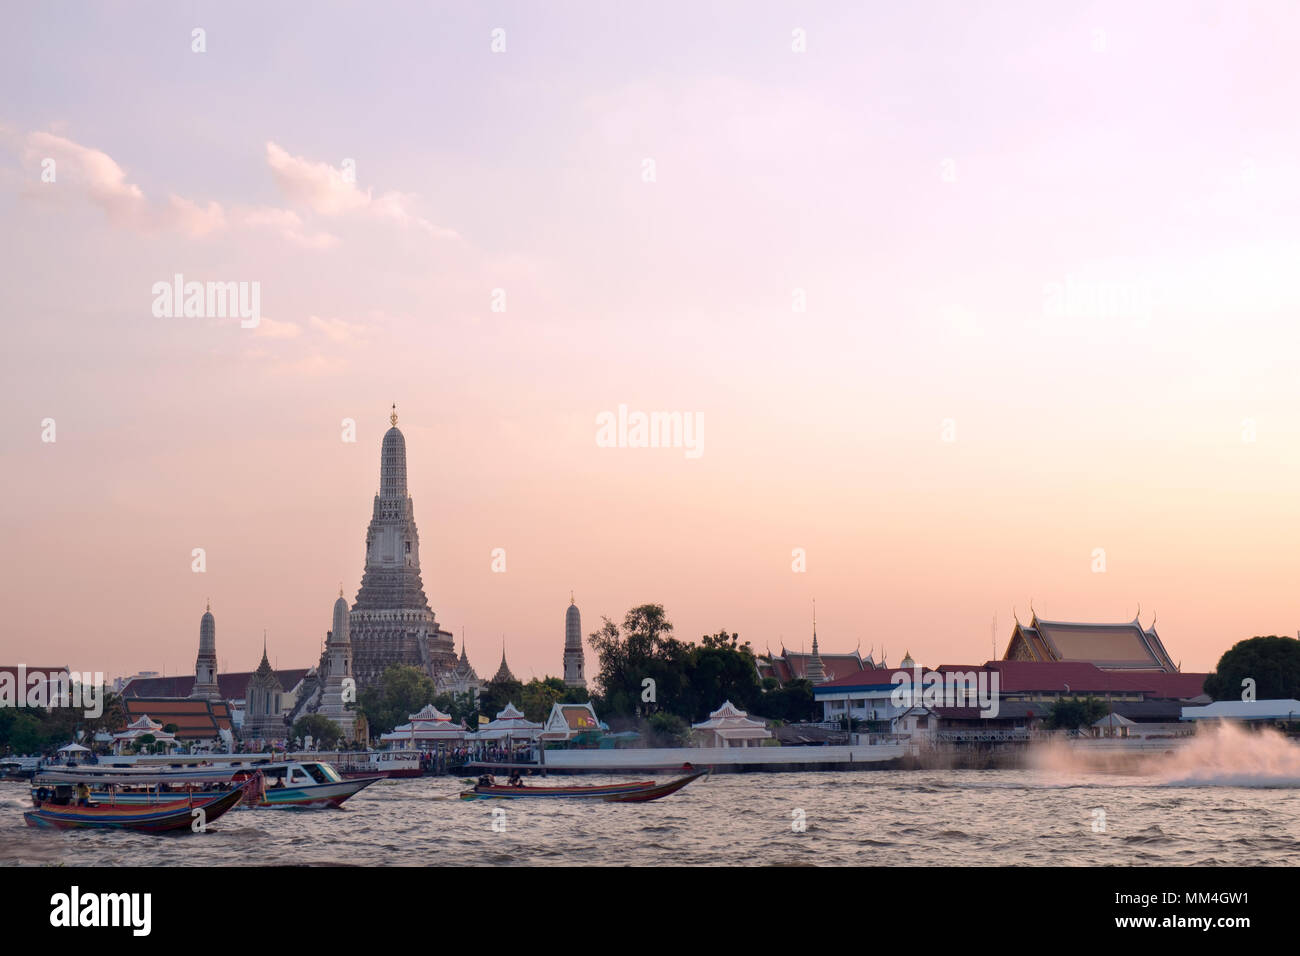 Wat Arun Buddhist religious places at sunset. Stock Photo